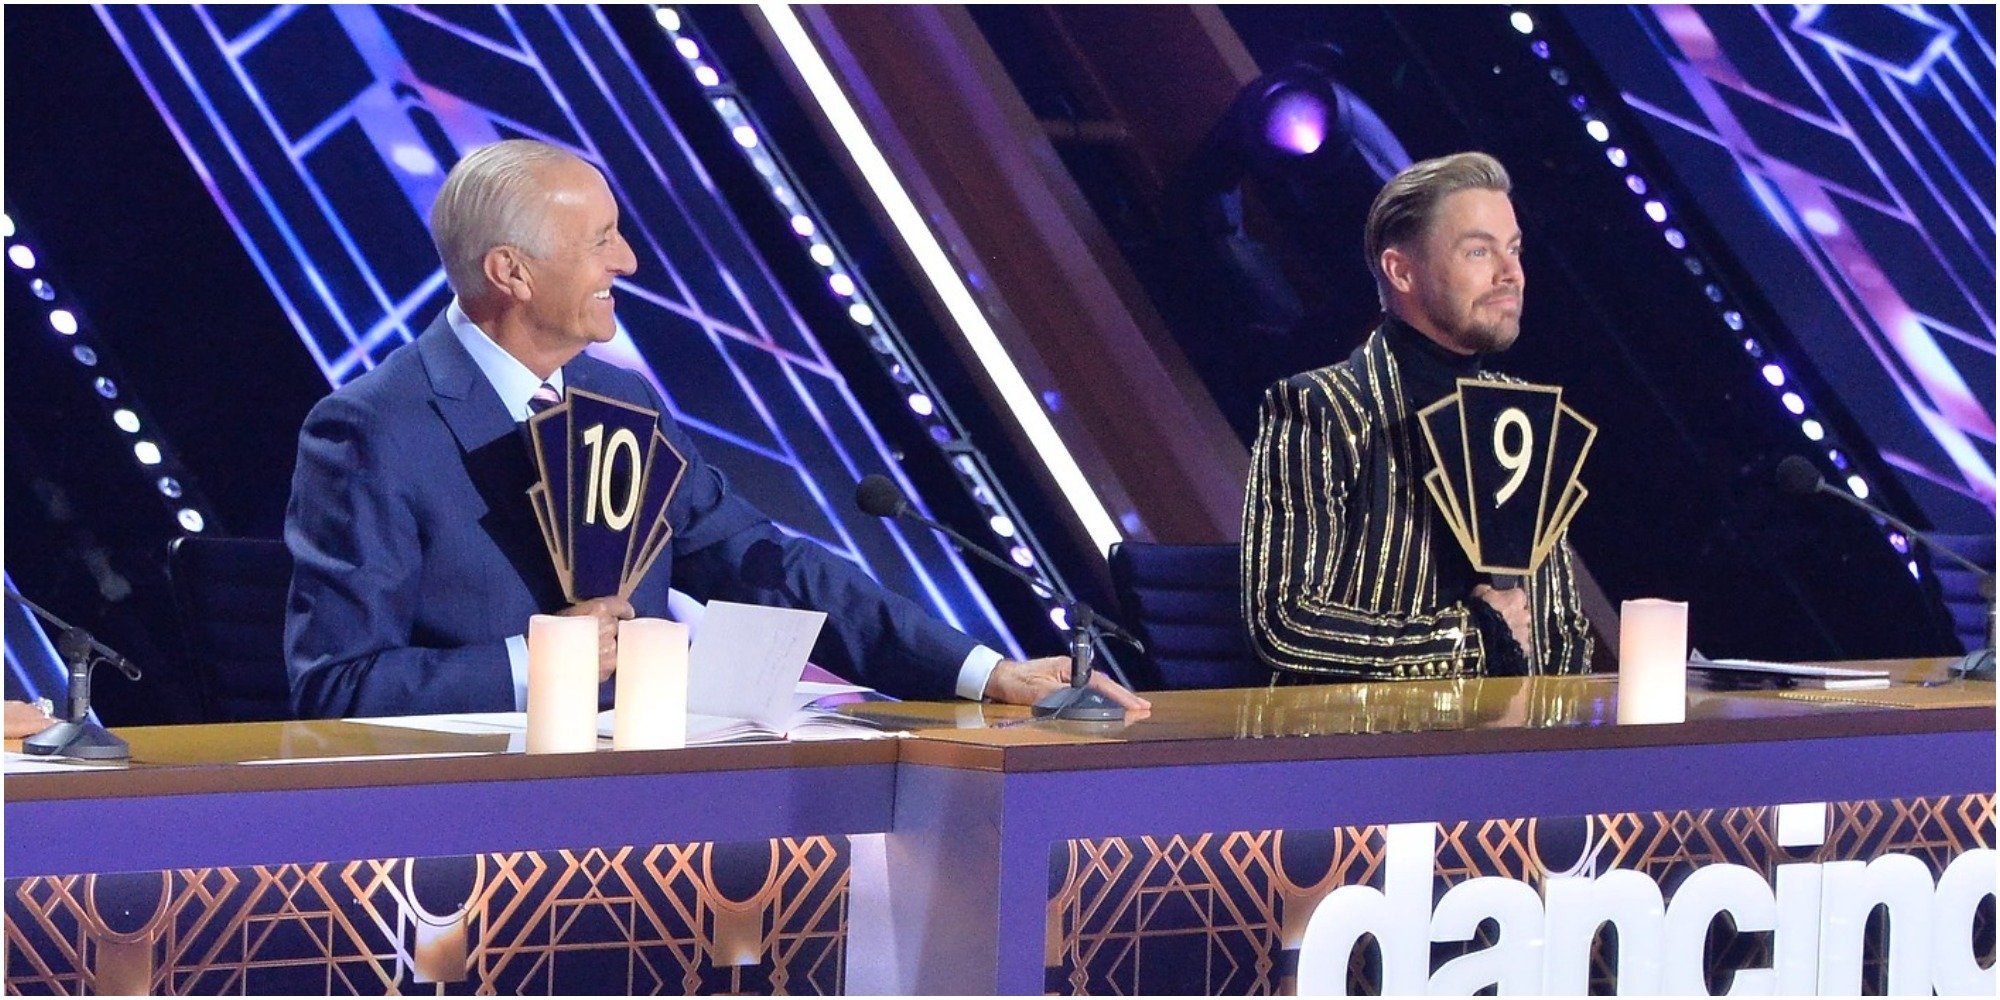 Len Goodman and Derek Hough sit on the judges panel of "Dancing with the Stars."